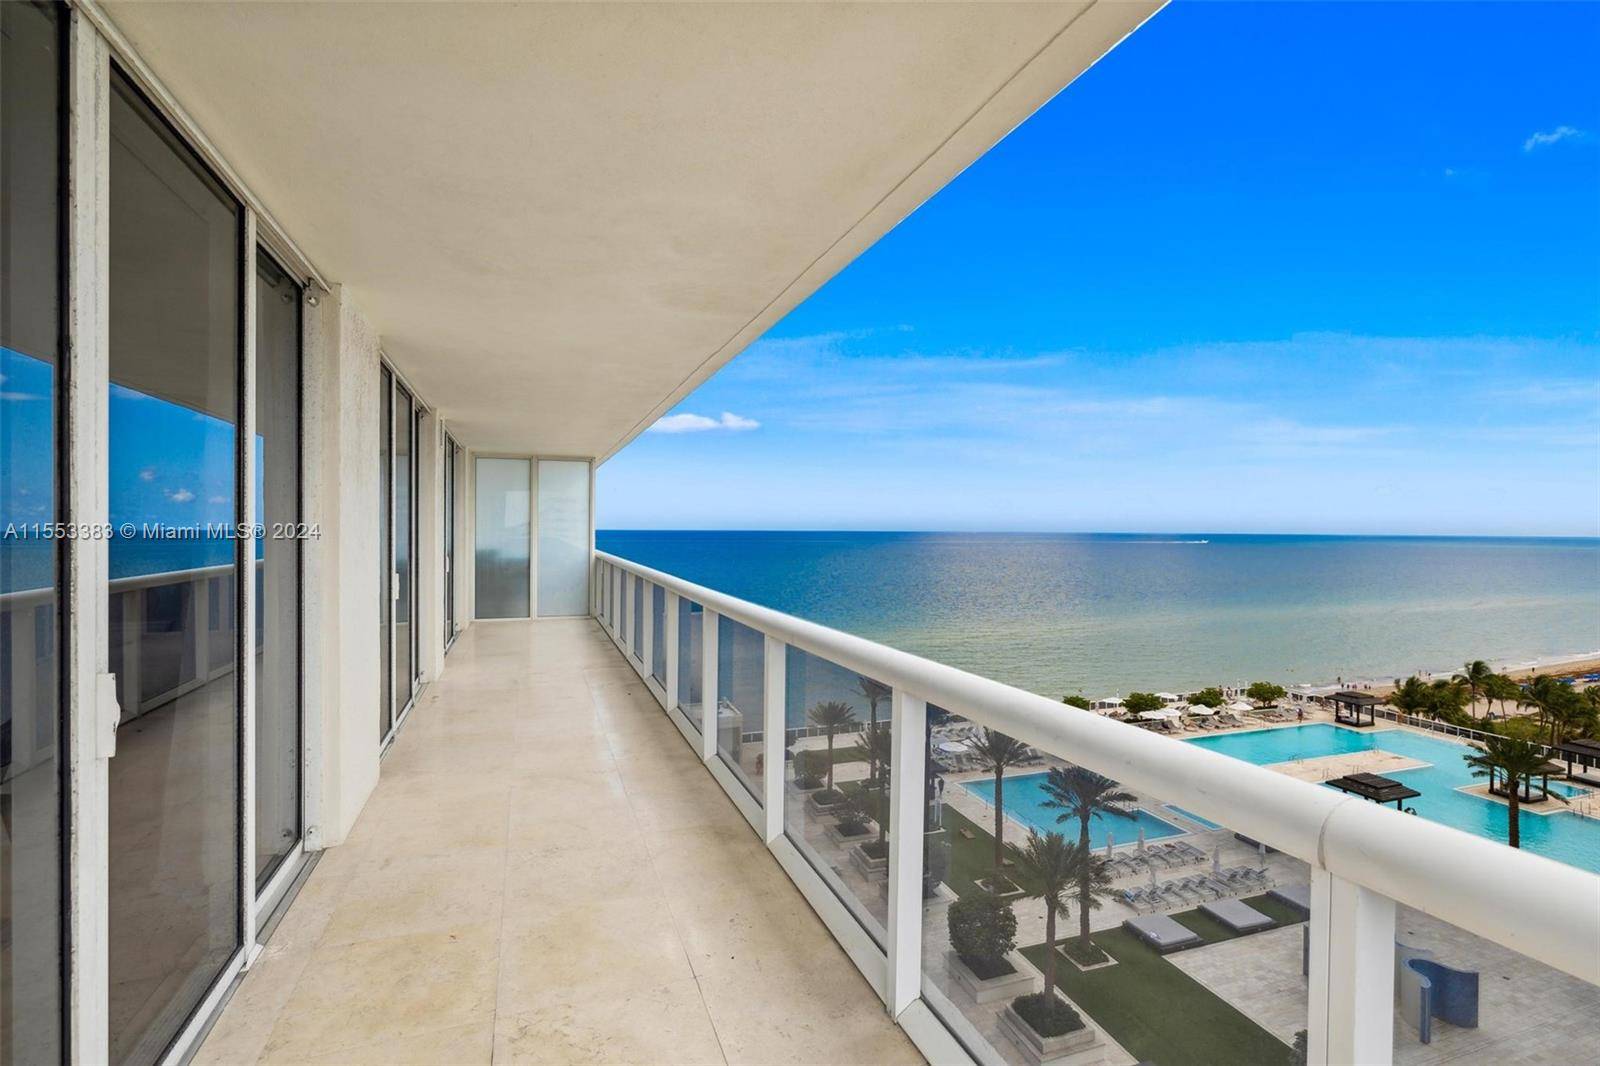 Modern 2 bedroom 2 full baths corner unit located in a luxury High rise directly on the ocean.